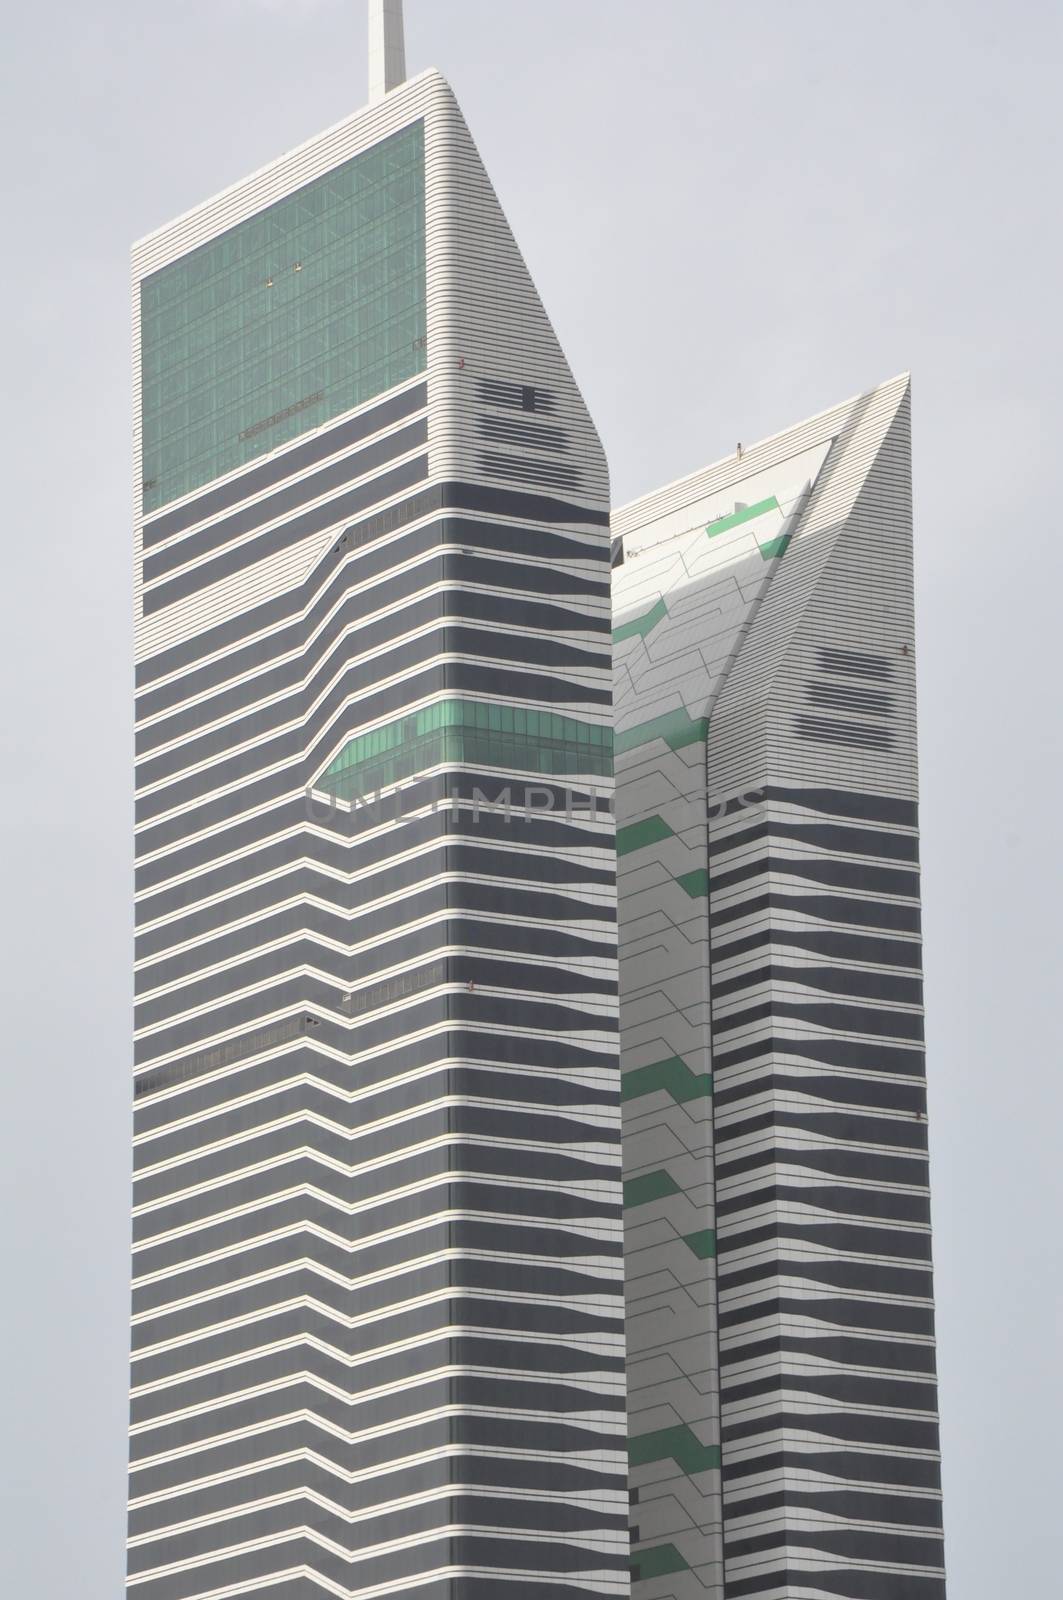 Acico Twin Towers along Sheikh Zayed Road in Dubai, UAE. Nikko Hotel Dubai (JAL Hotel) is the taller tower and Acico Office Tower (Nassima Tower) is shorter.